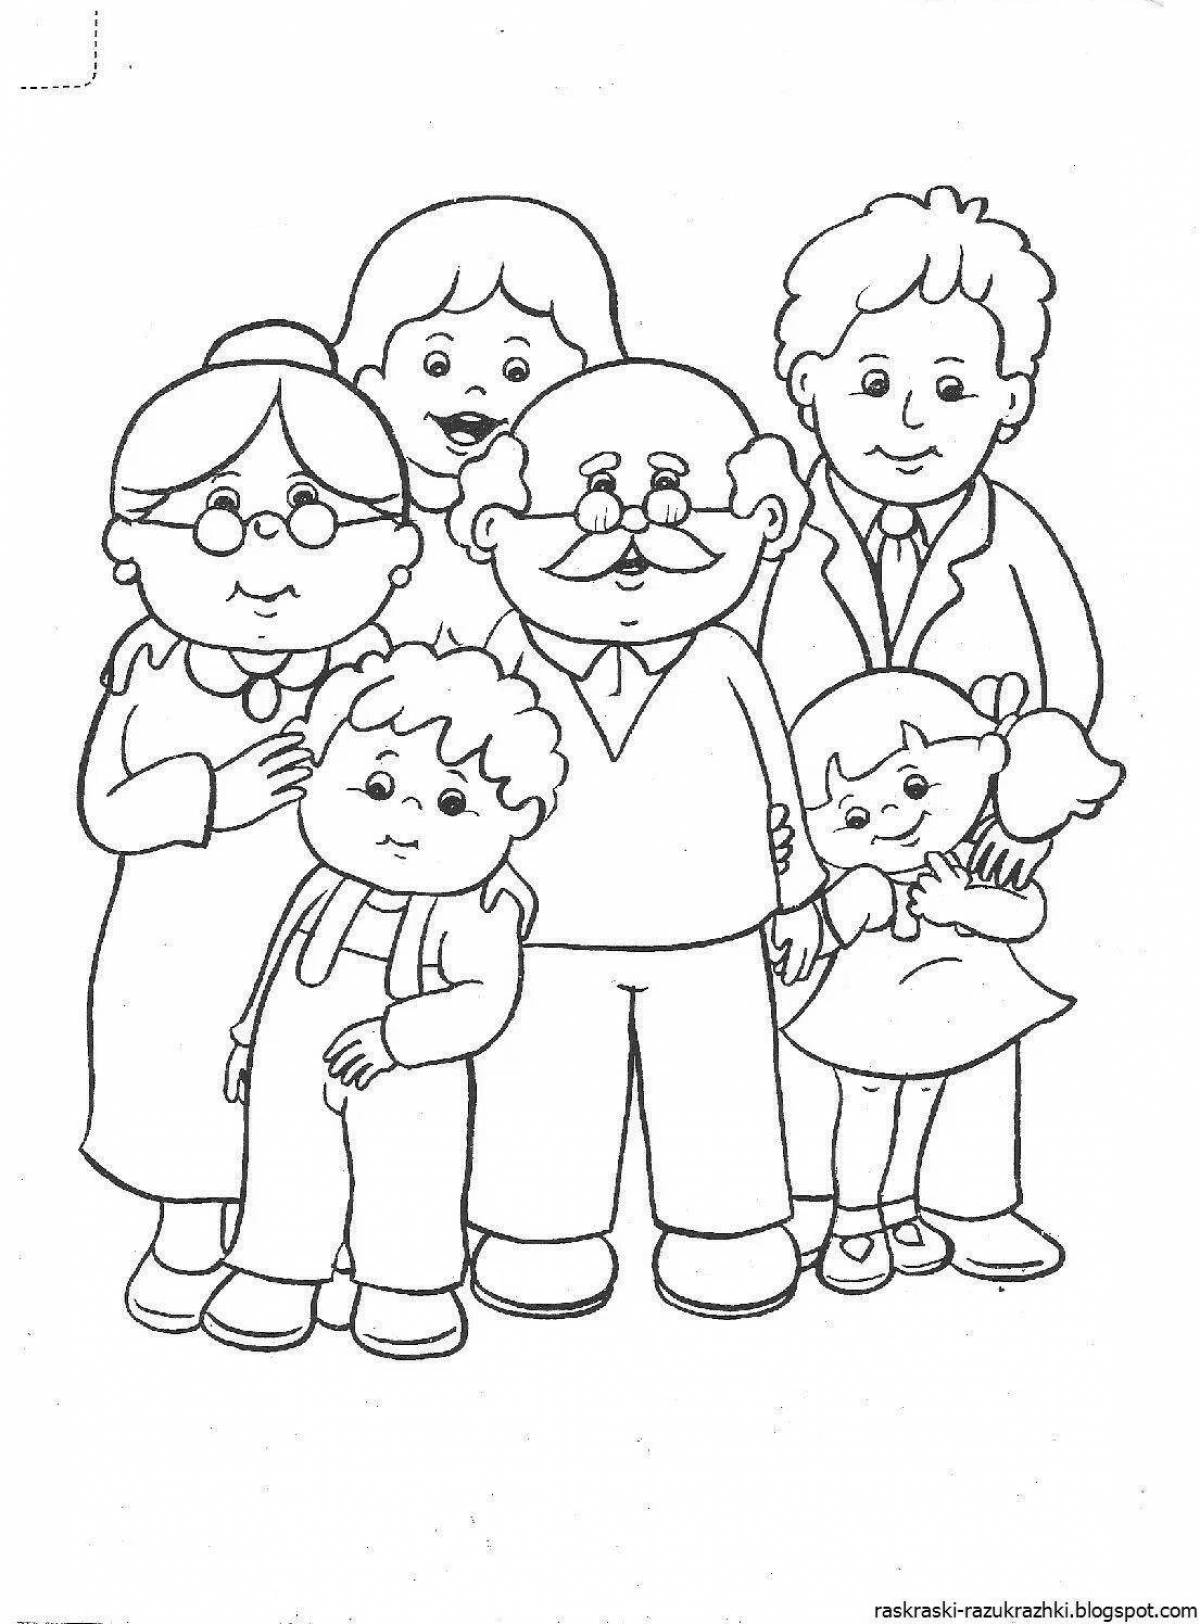 Magic family coloring book for 7 year olds